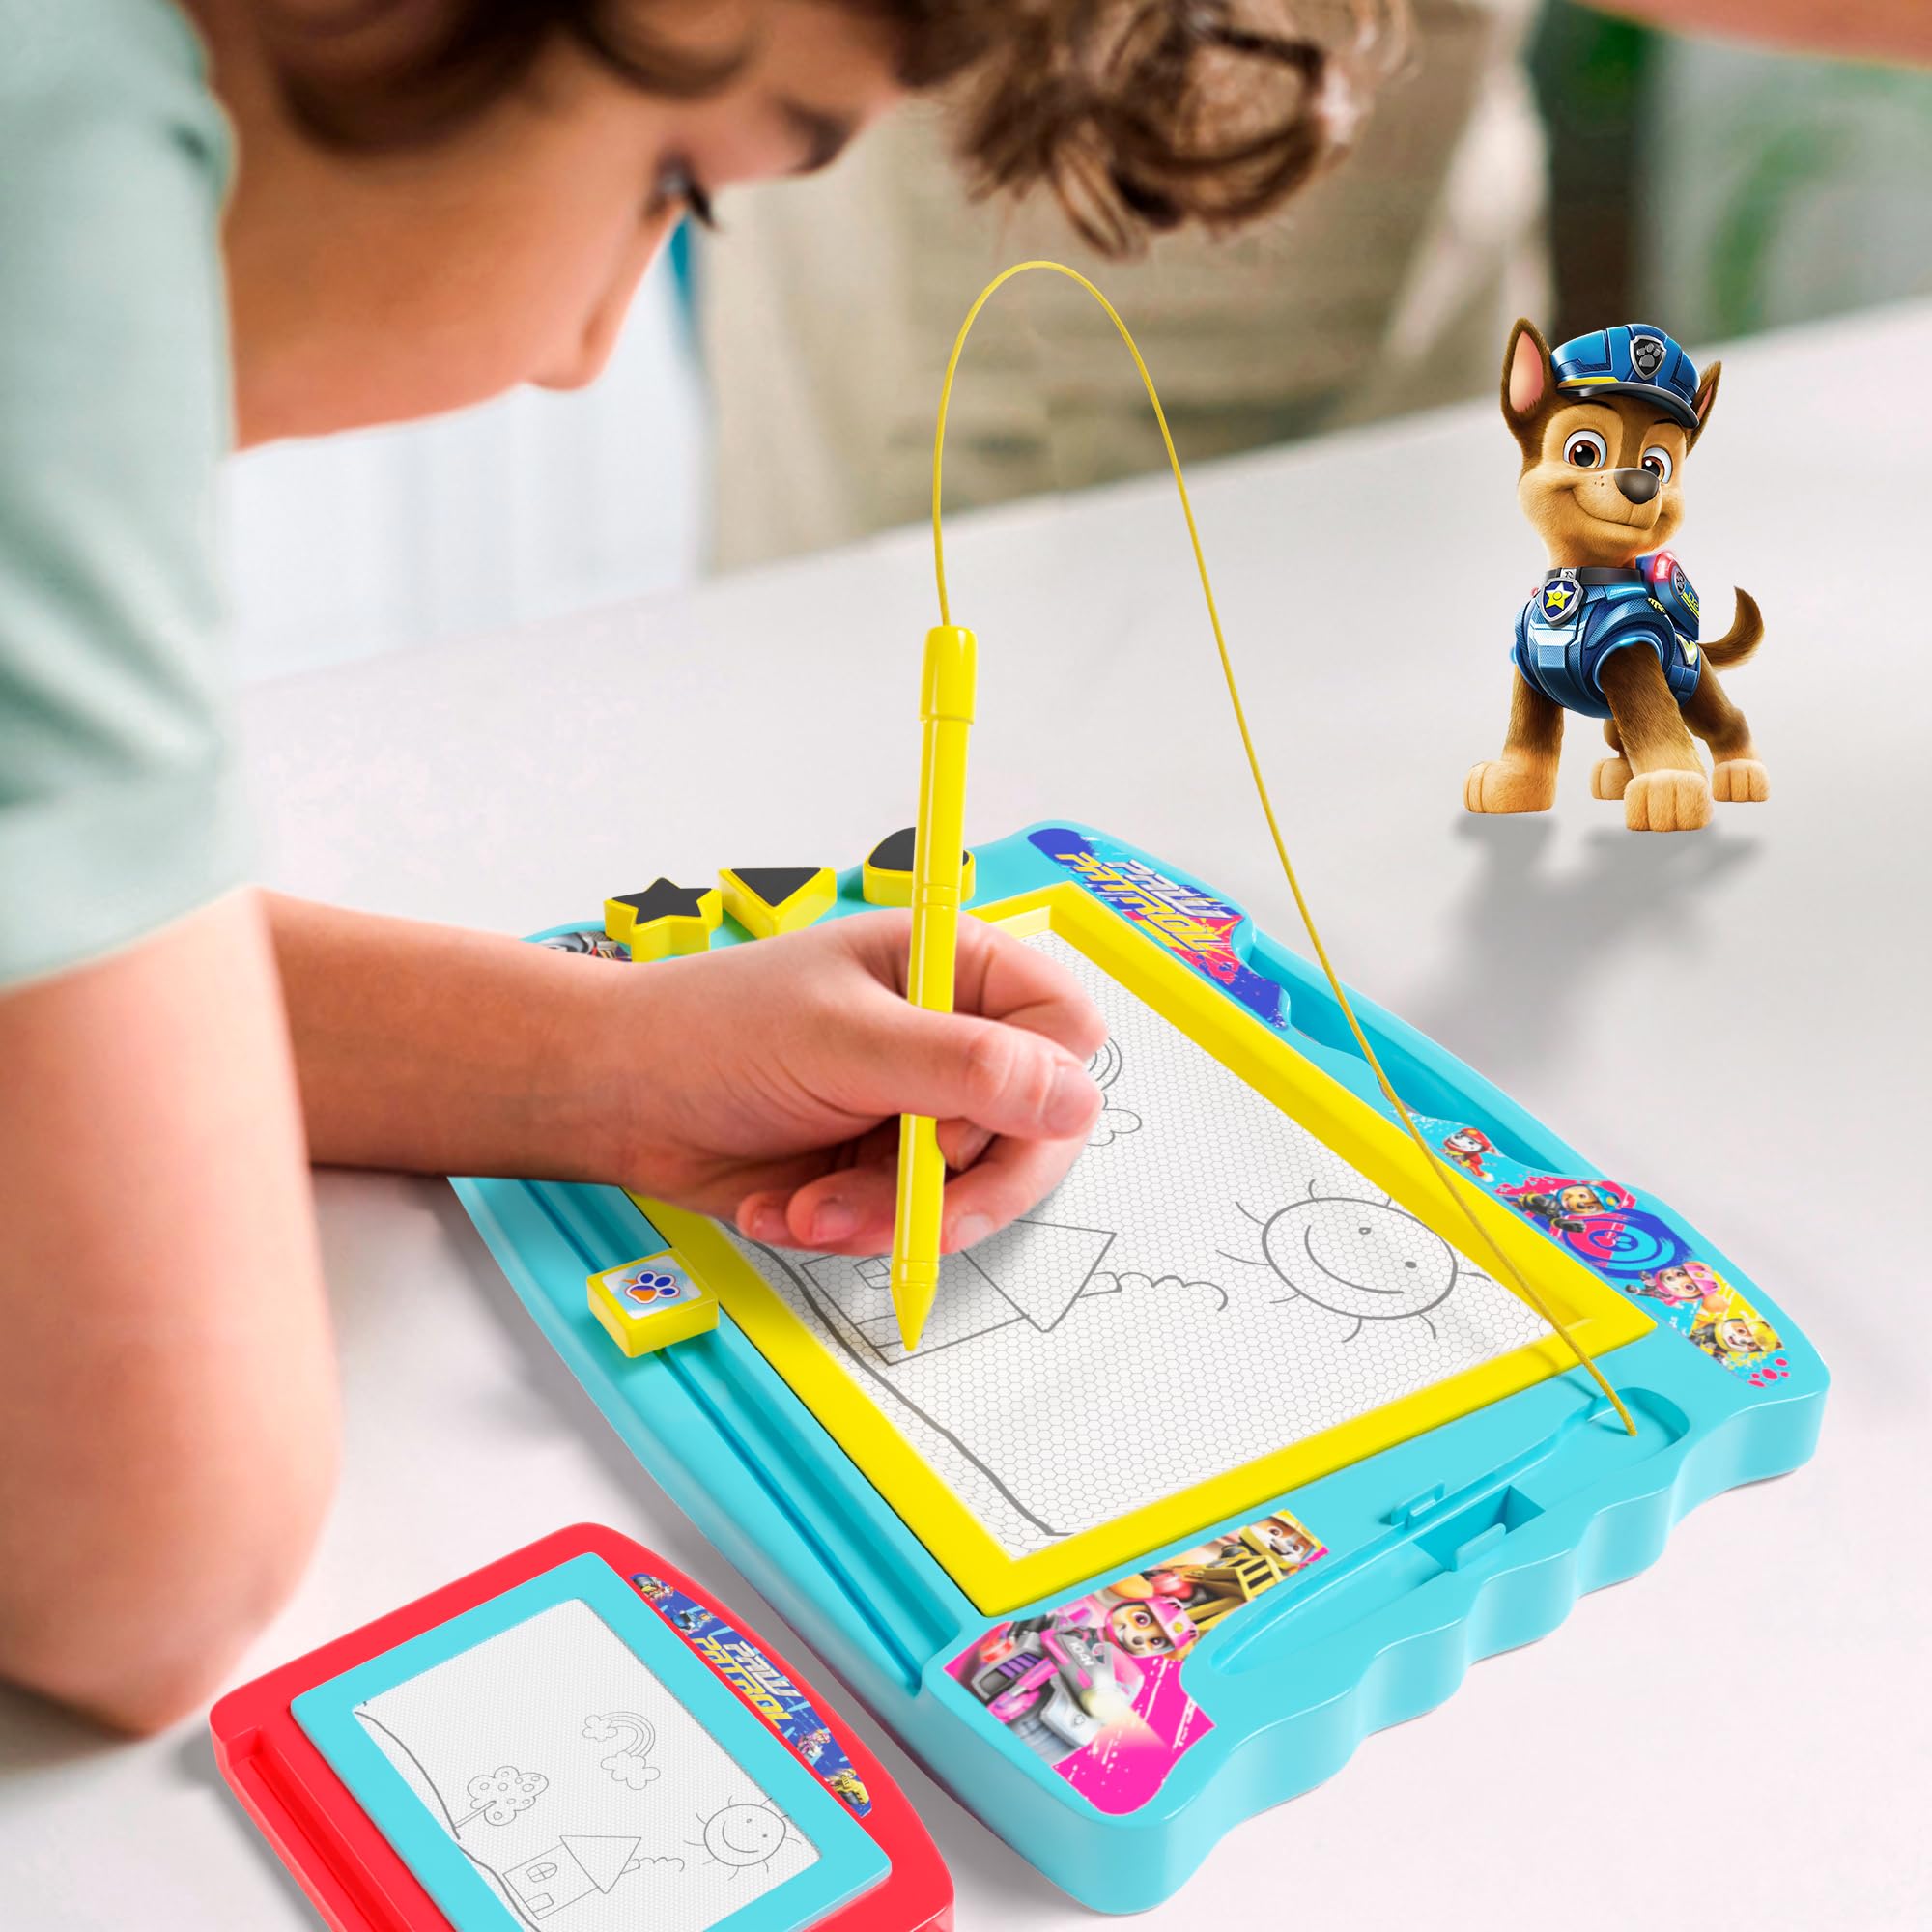 Lollipop PAW Patrol 2 Pack Magnetic Drawing Board, One Large Board with 3 Stamps and Stylus Pen and One Travel Size Drawing Board, for Boys or Girls…